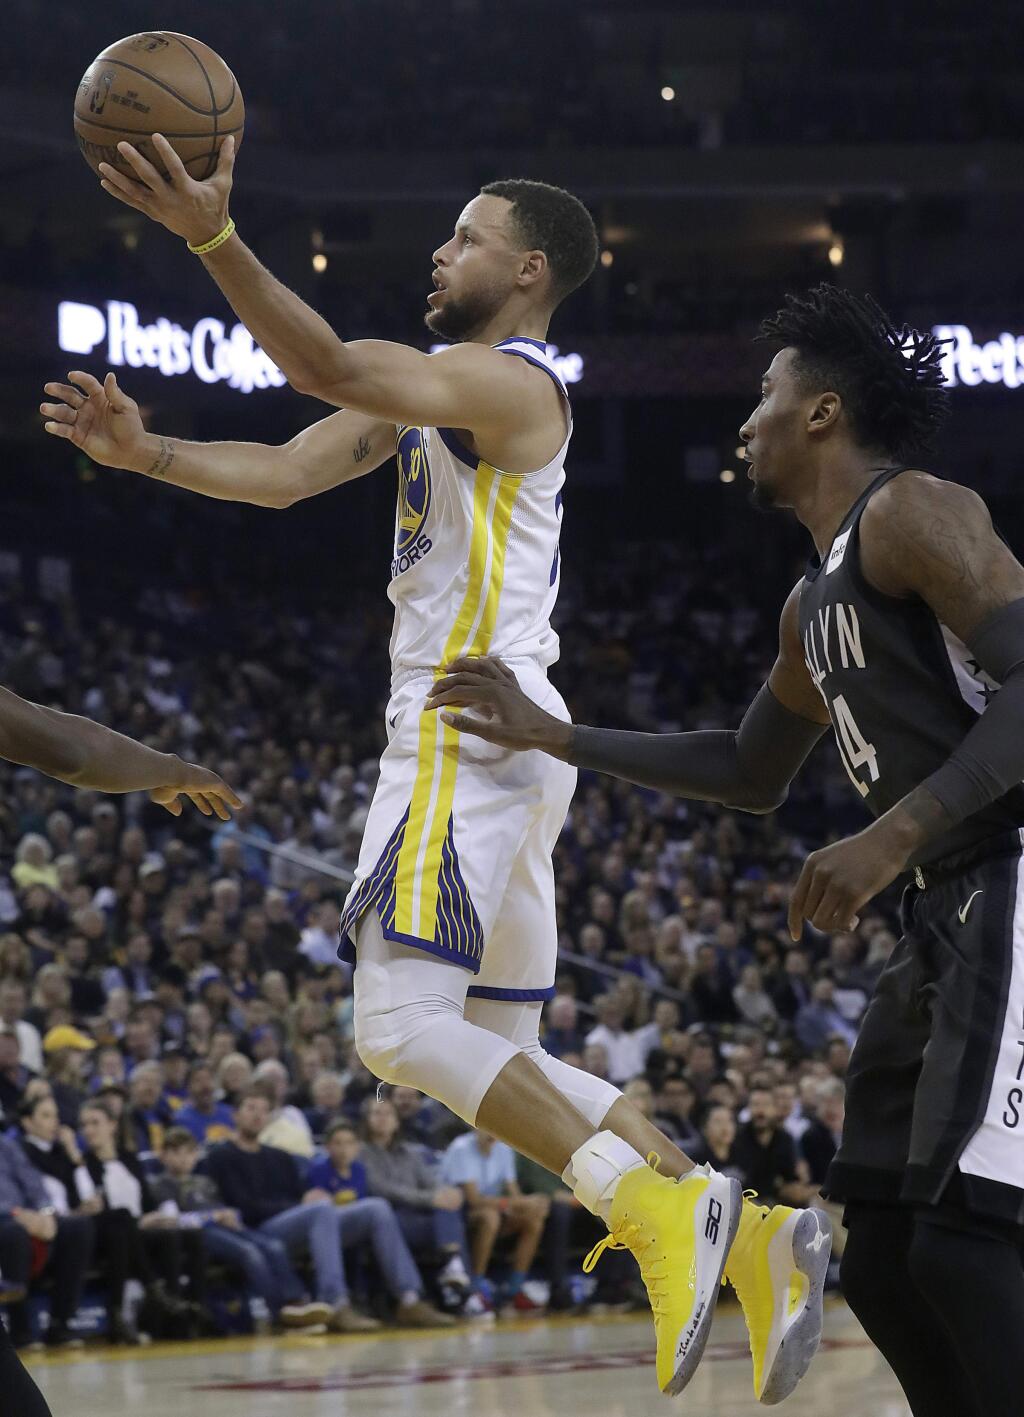 Golden State Warriors guard Stephen Curry, left, shoots in front of Brooklyn Nets forward Rondae Hollis-Jefferson during the first half of an NBA basketball game in Oakland, Calif., Tuesday, March 6, 2018. (AP Photo/Jeff Chiu)